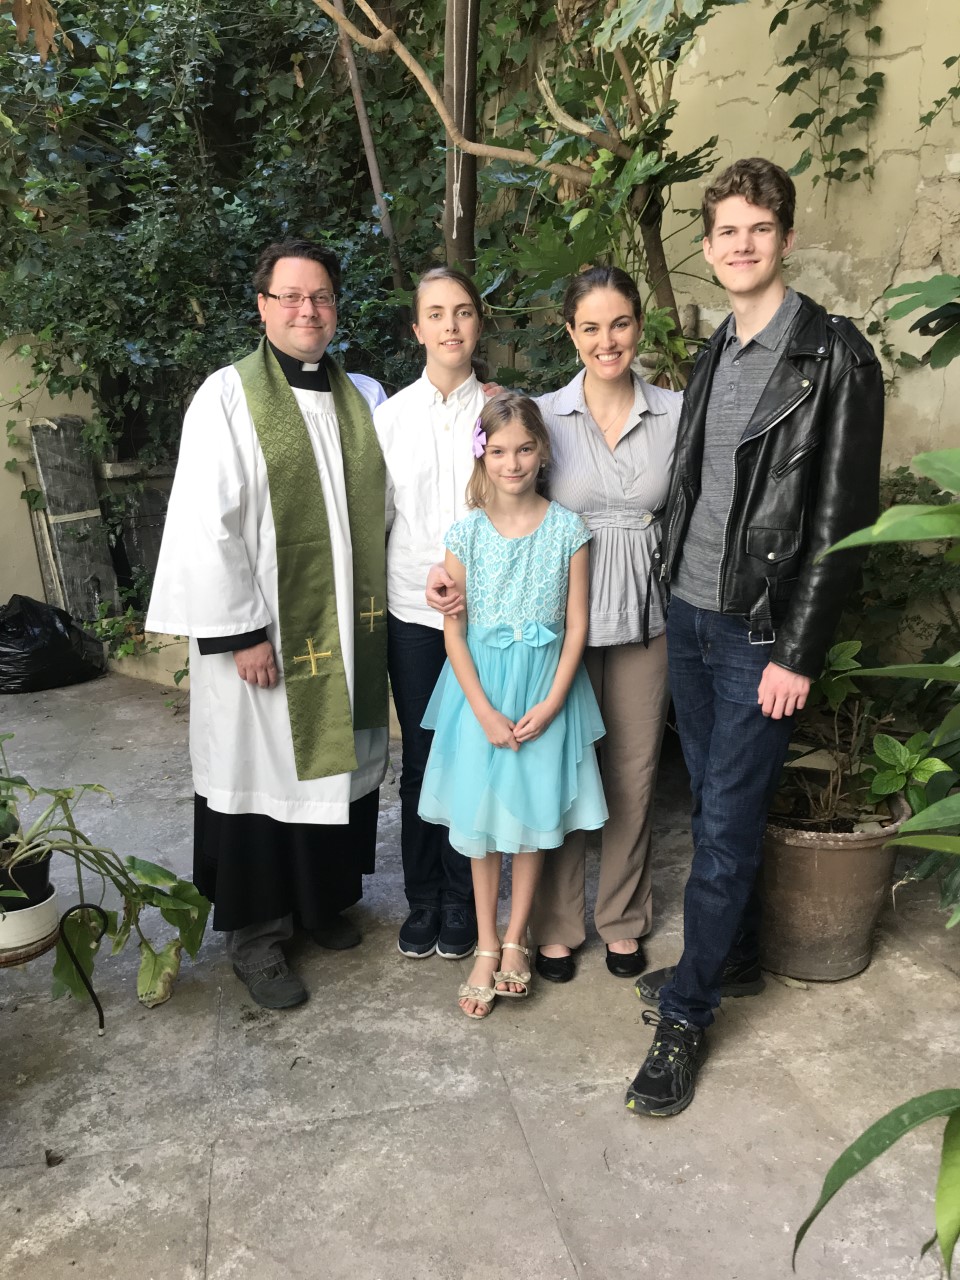 Colour image of the Rev. Dr Duane Alexander Miller with family